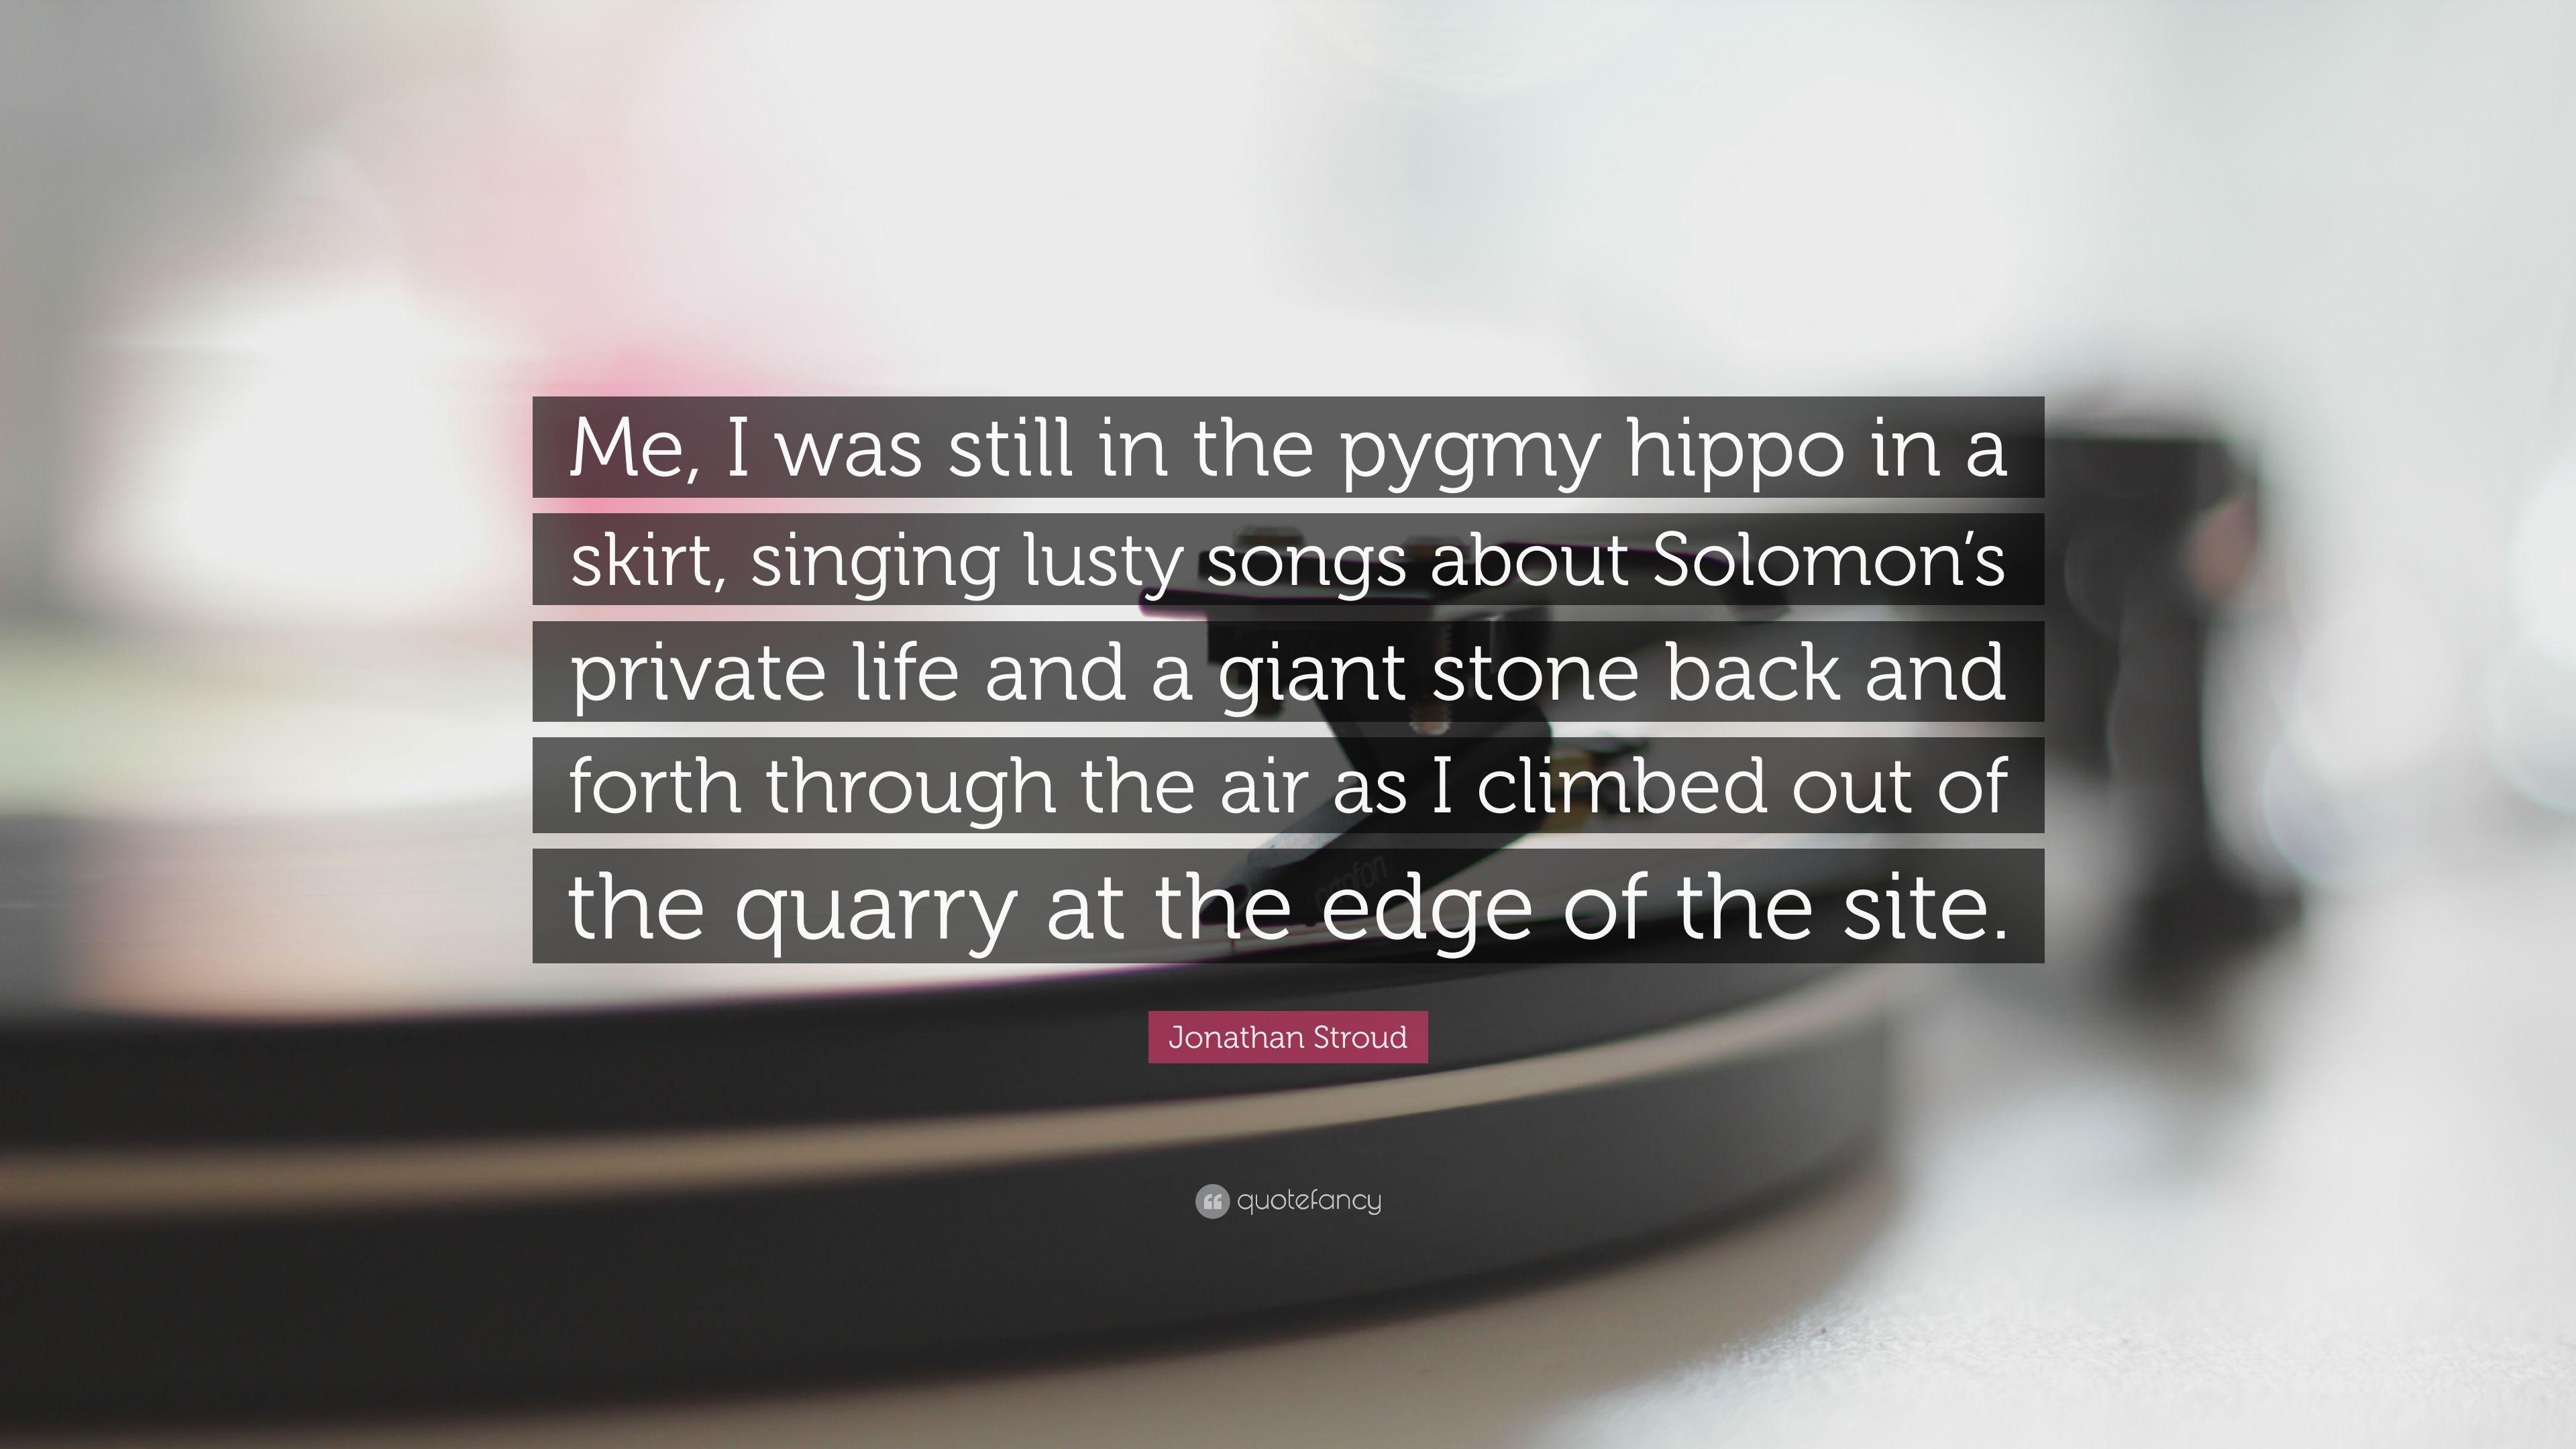 Jonathan Stroud Quote: “Me, I was still in the pygmy hippo in a